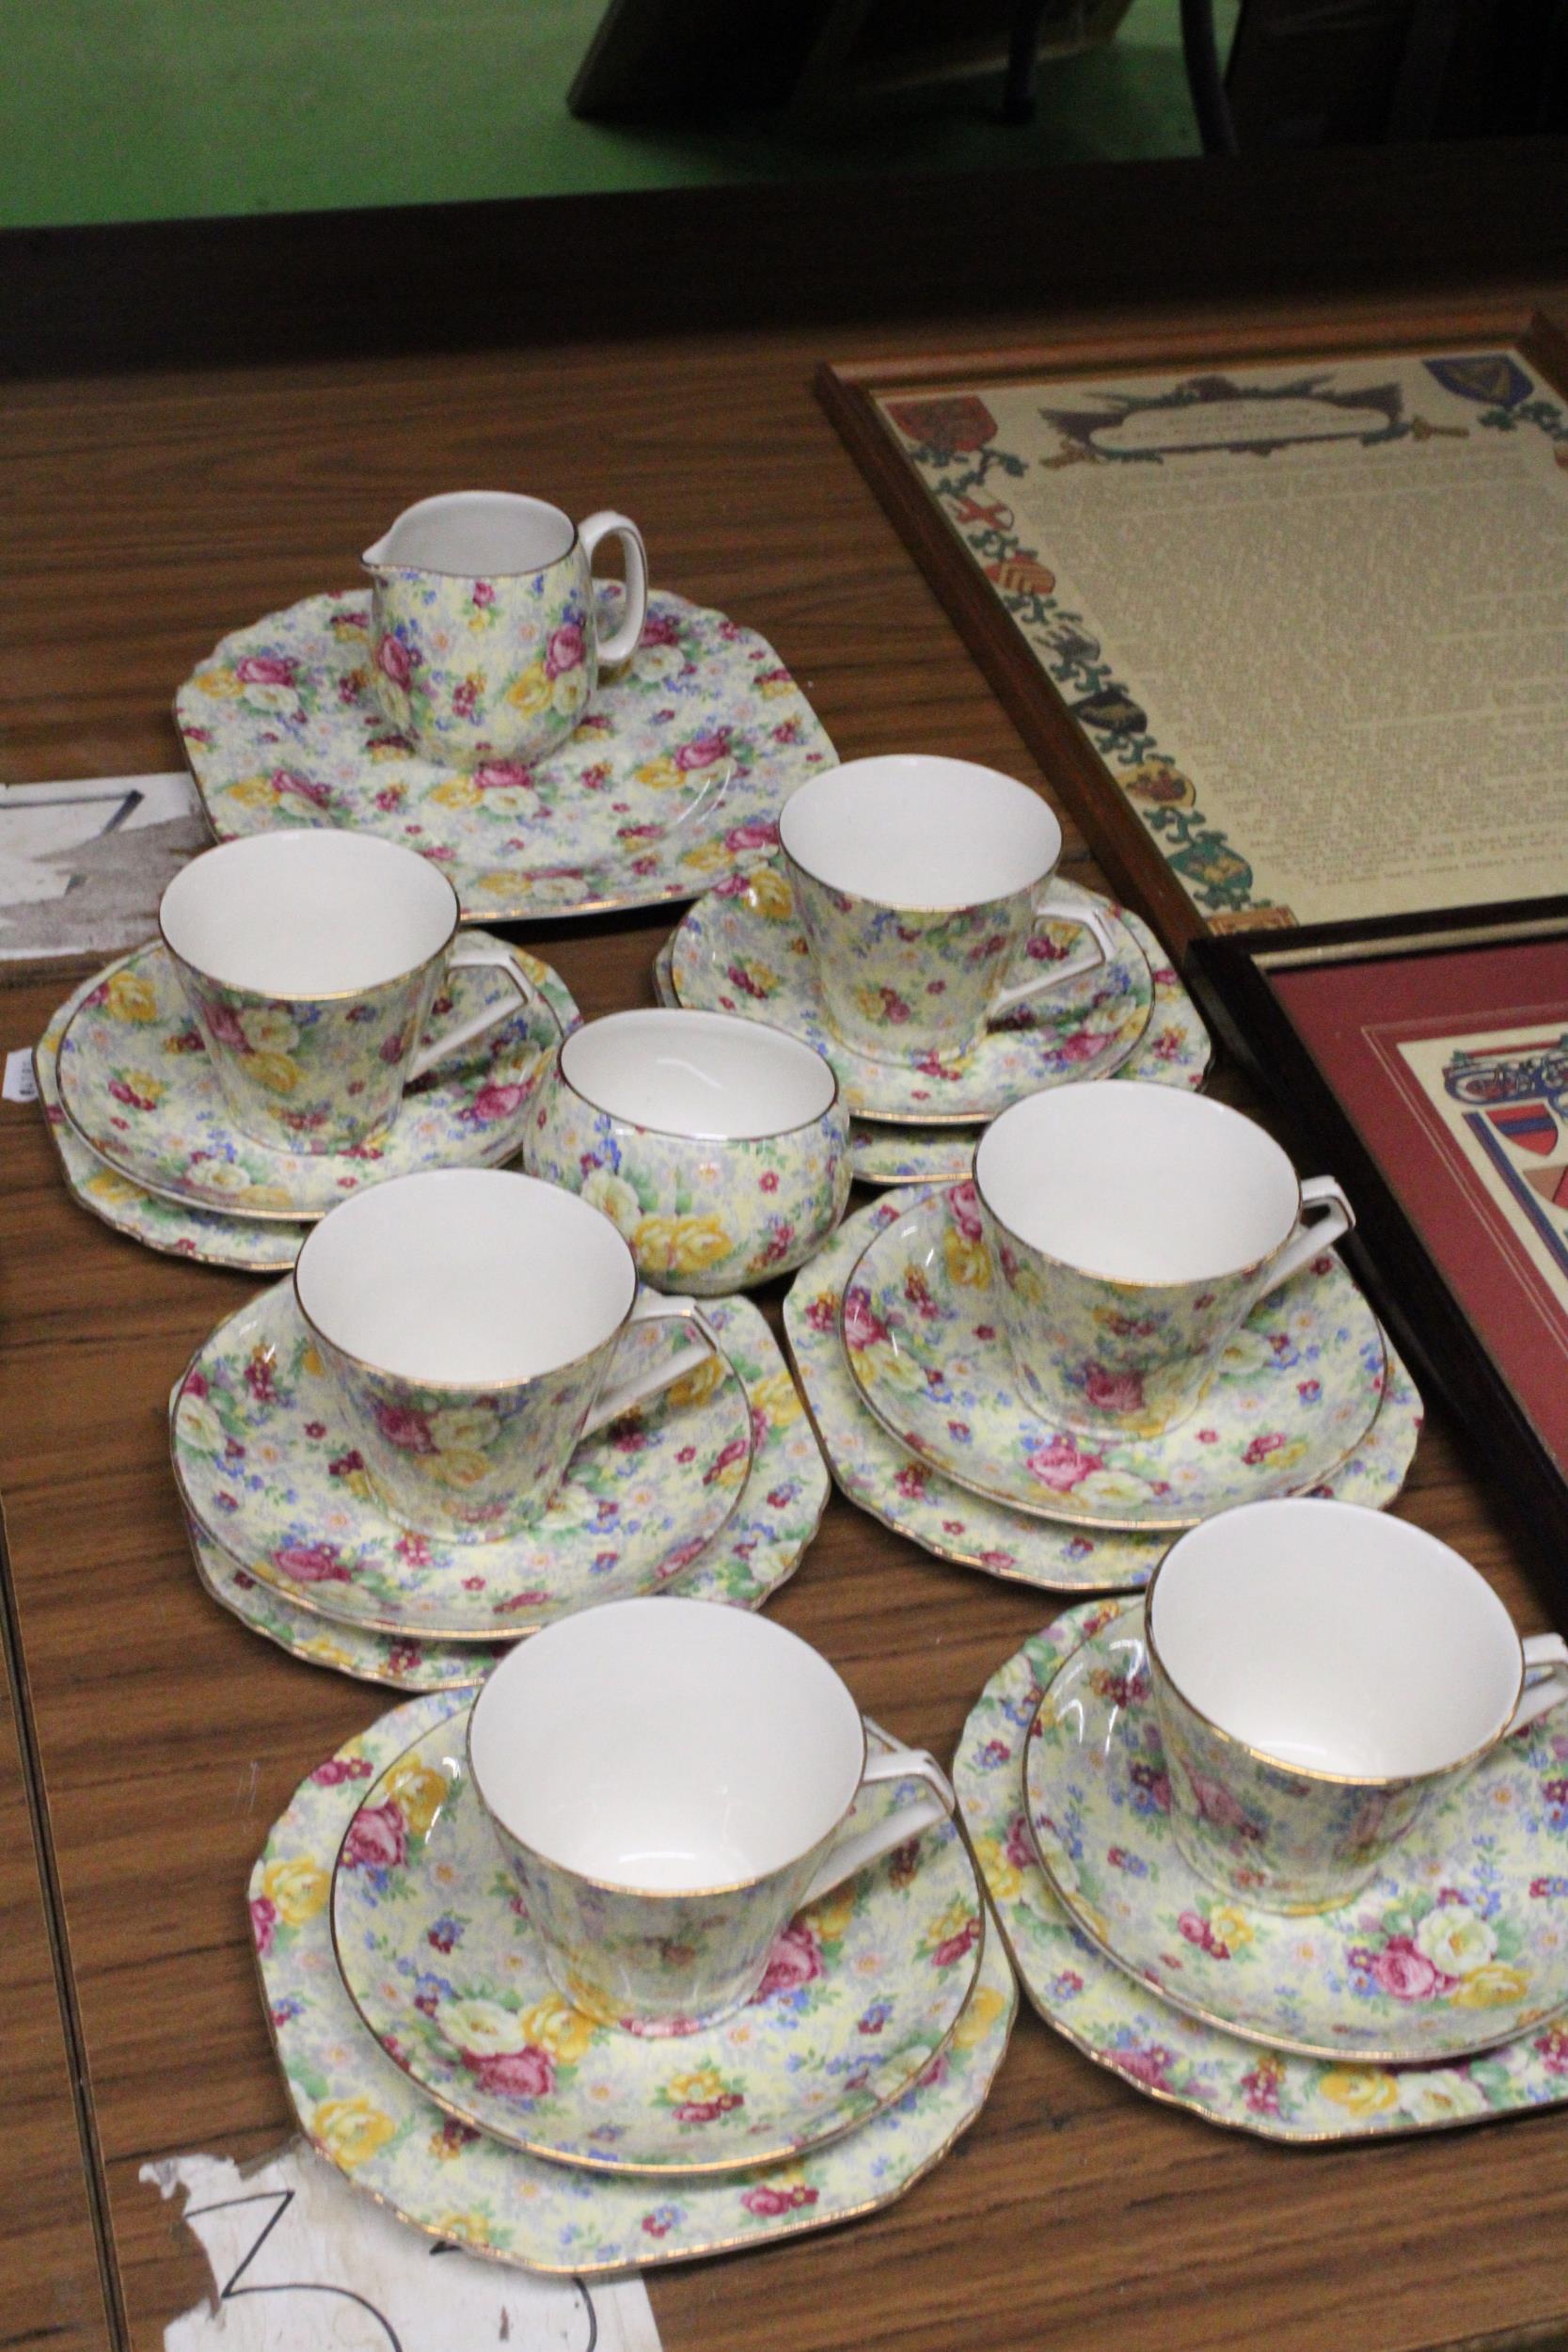 A LORD NELSON CHINTZ TEASET TO INCLUDE A CAKE PLATE, CREAM JUG, SUGAR BOWL, CUPS, SAUCERS AND SIDE